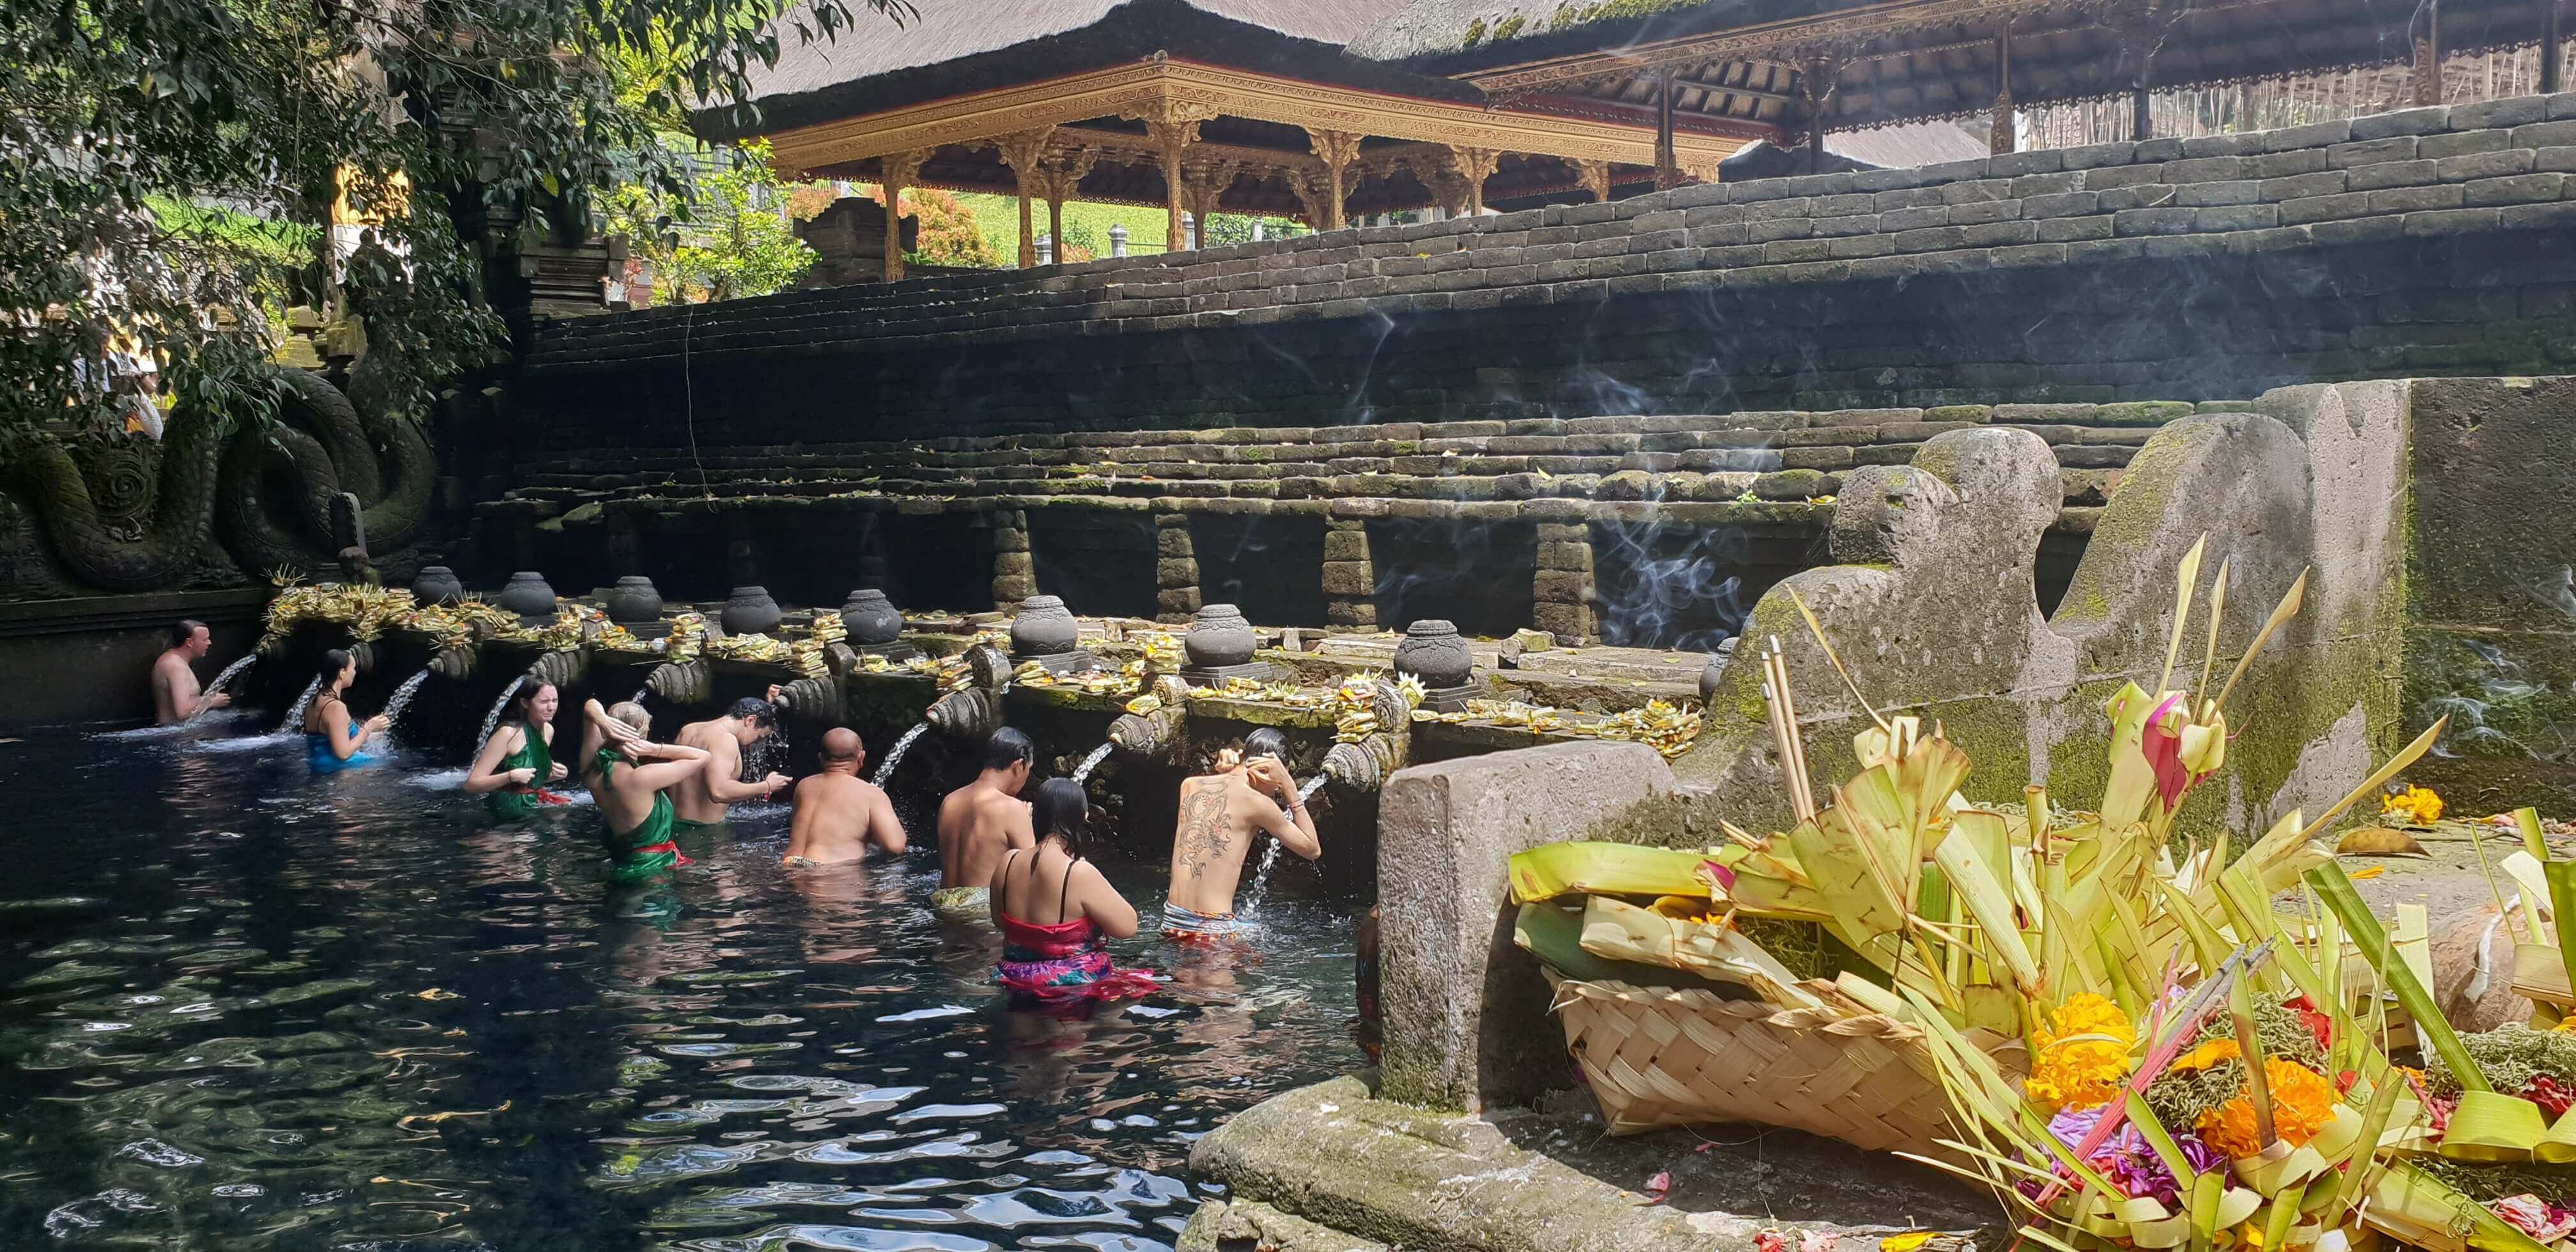 People of different ethnicities taking a holy dip in the Tirta Empul Water Temple